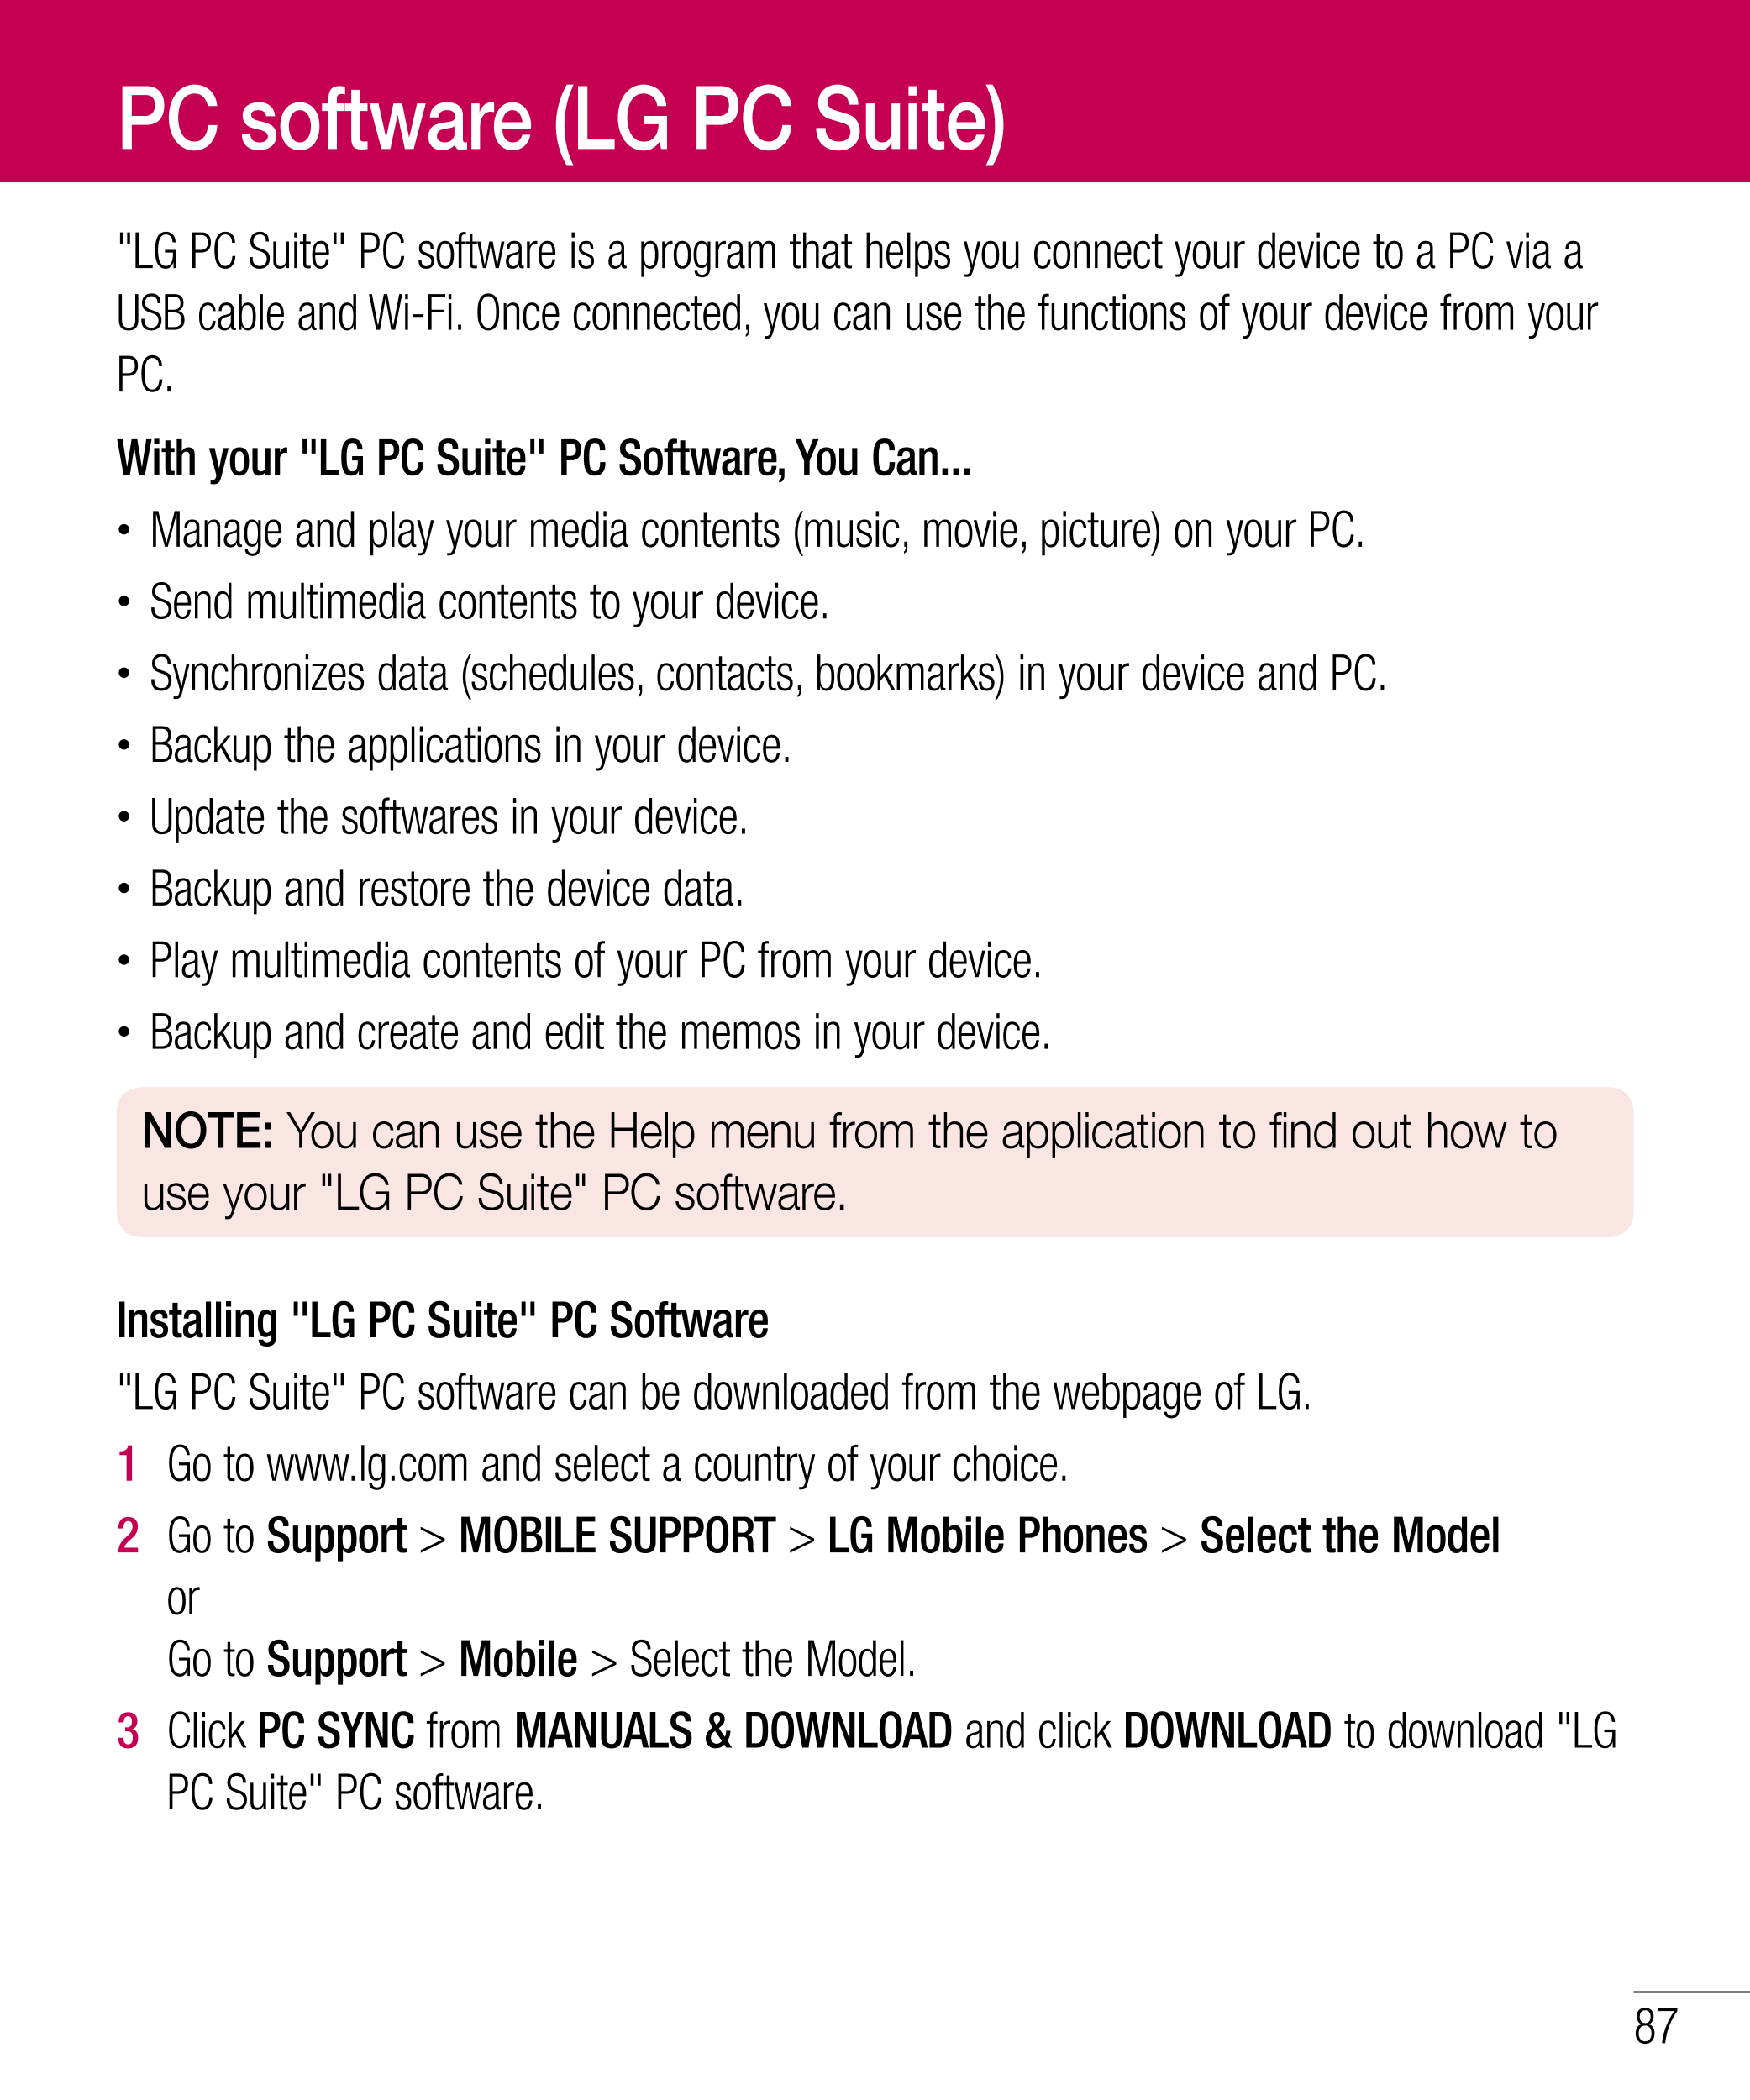 PC software (LG PC Suite)
"LG PC Suite" PC software is a program that helps you connect your device to a PC via a 
USB cable and